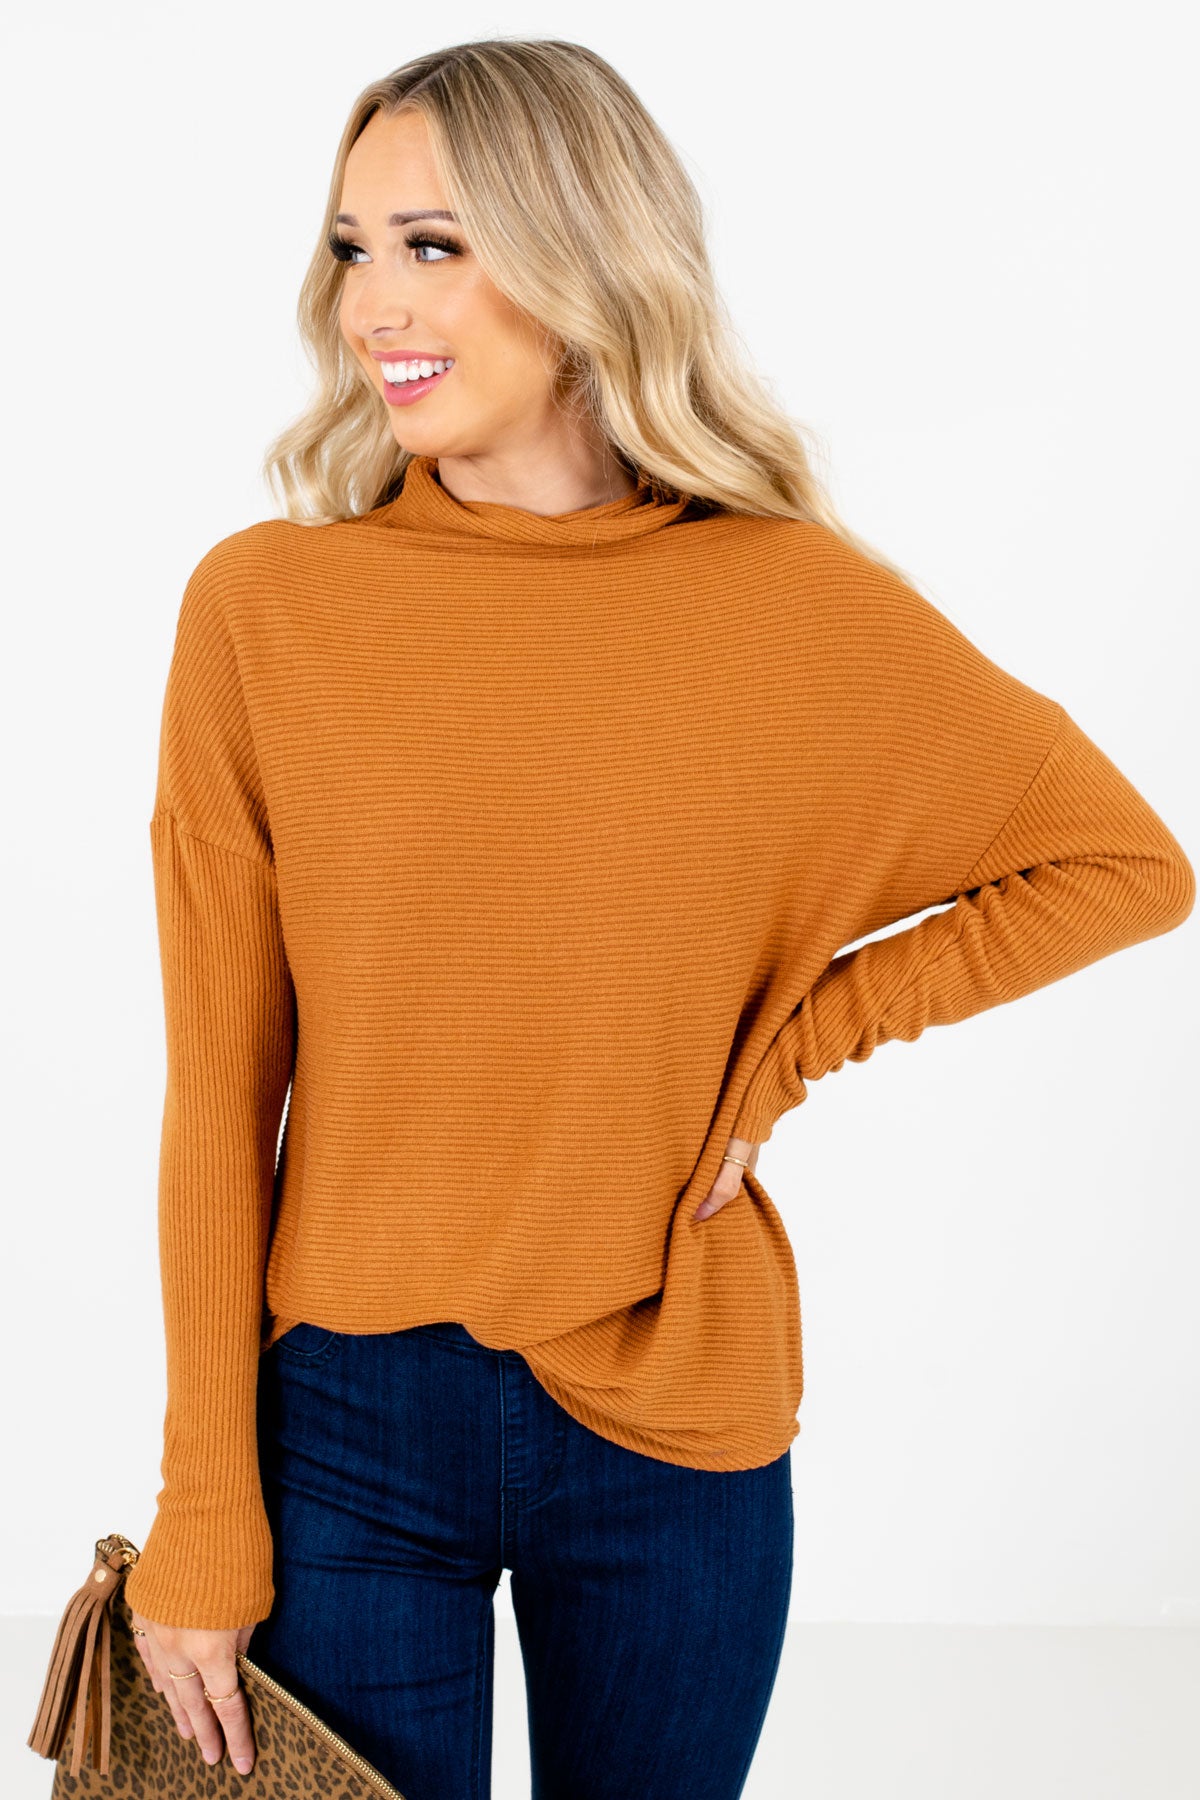 Tawny Orange Cowl Neck Style Boutique Sweaters for Women